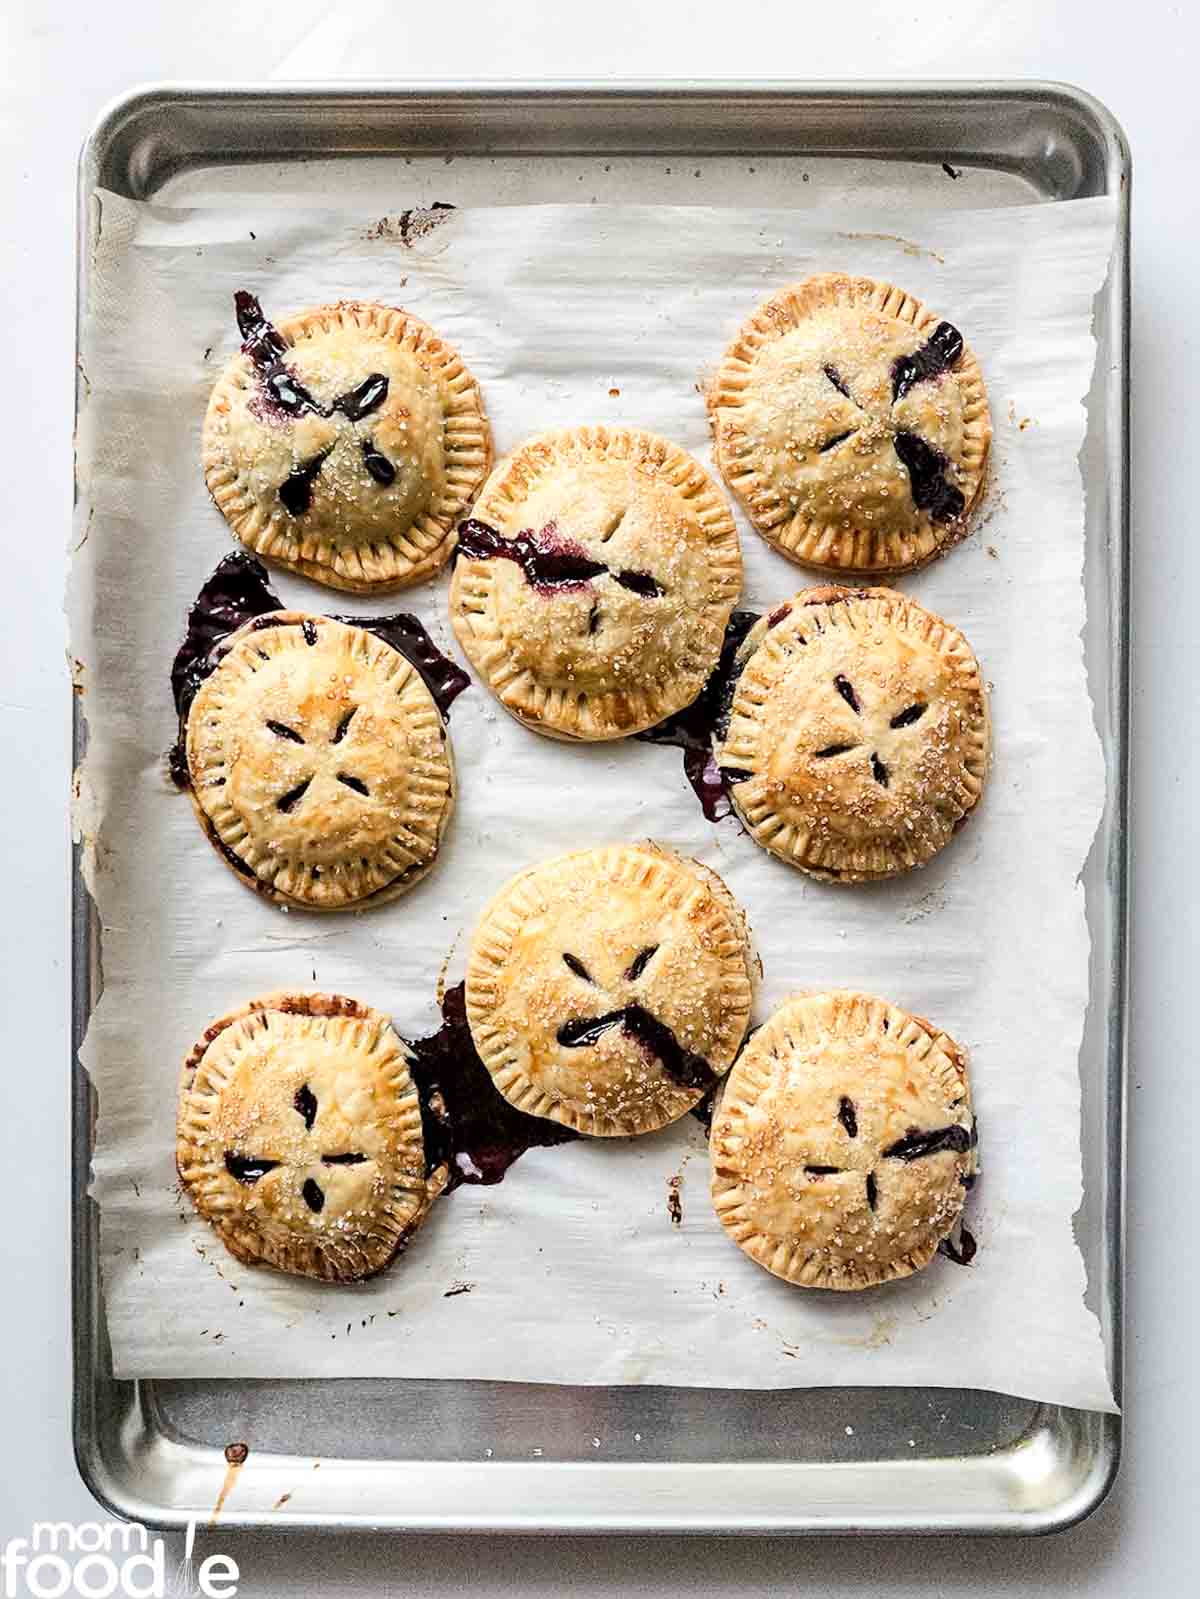 baked blueberry hand pies on sheet pan